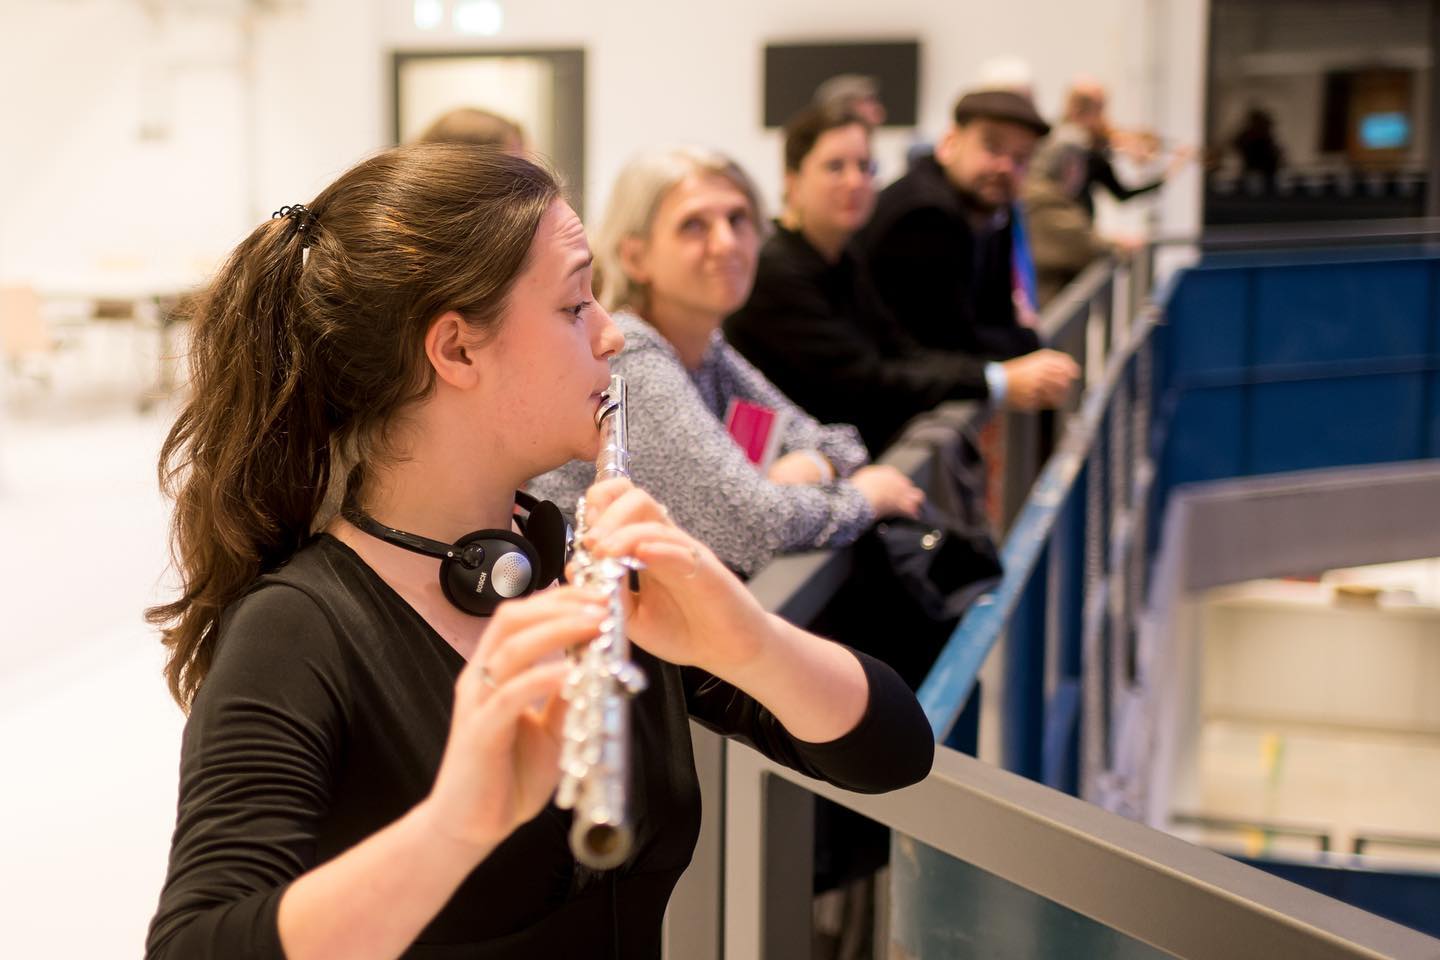 A young flutist at the ballustrade of Hall E, she plays, people watch next to her.
